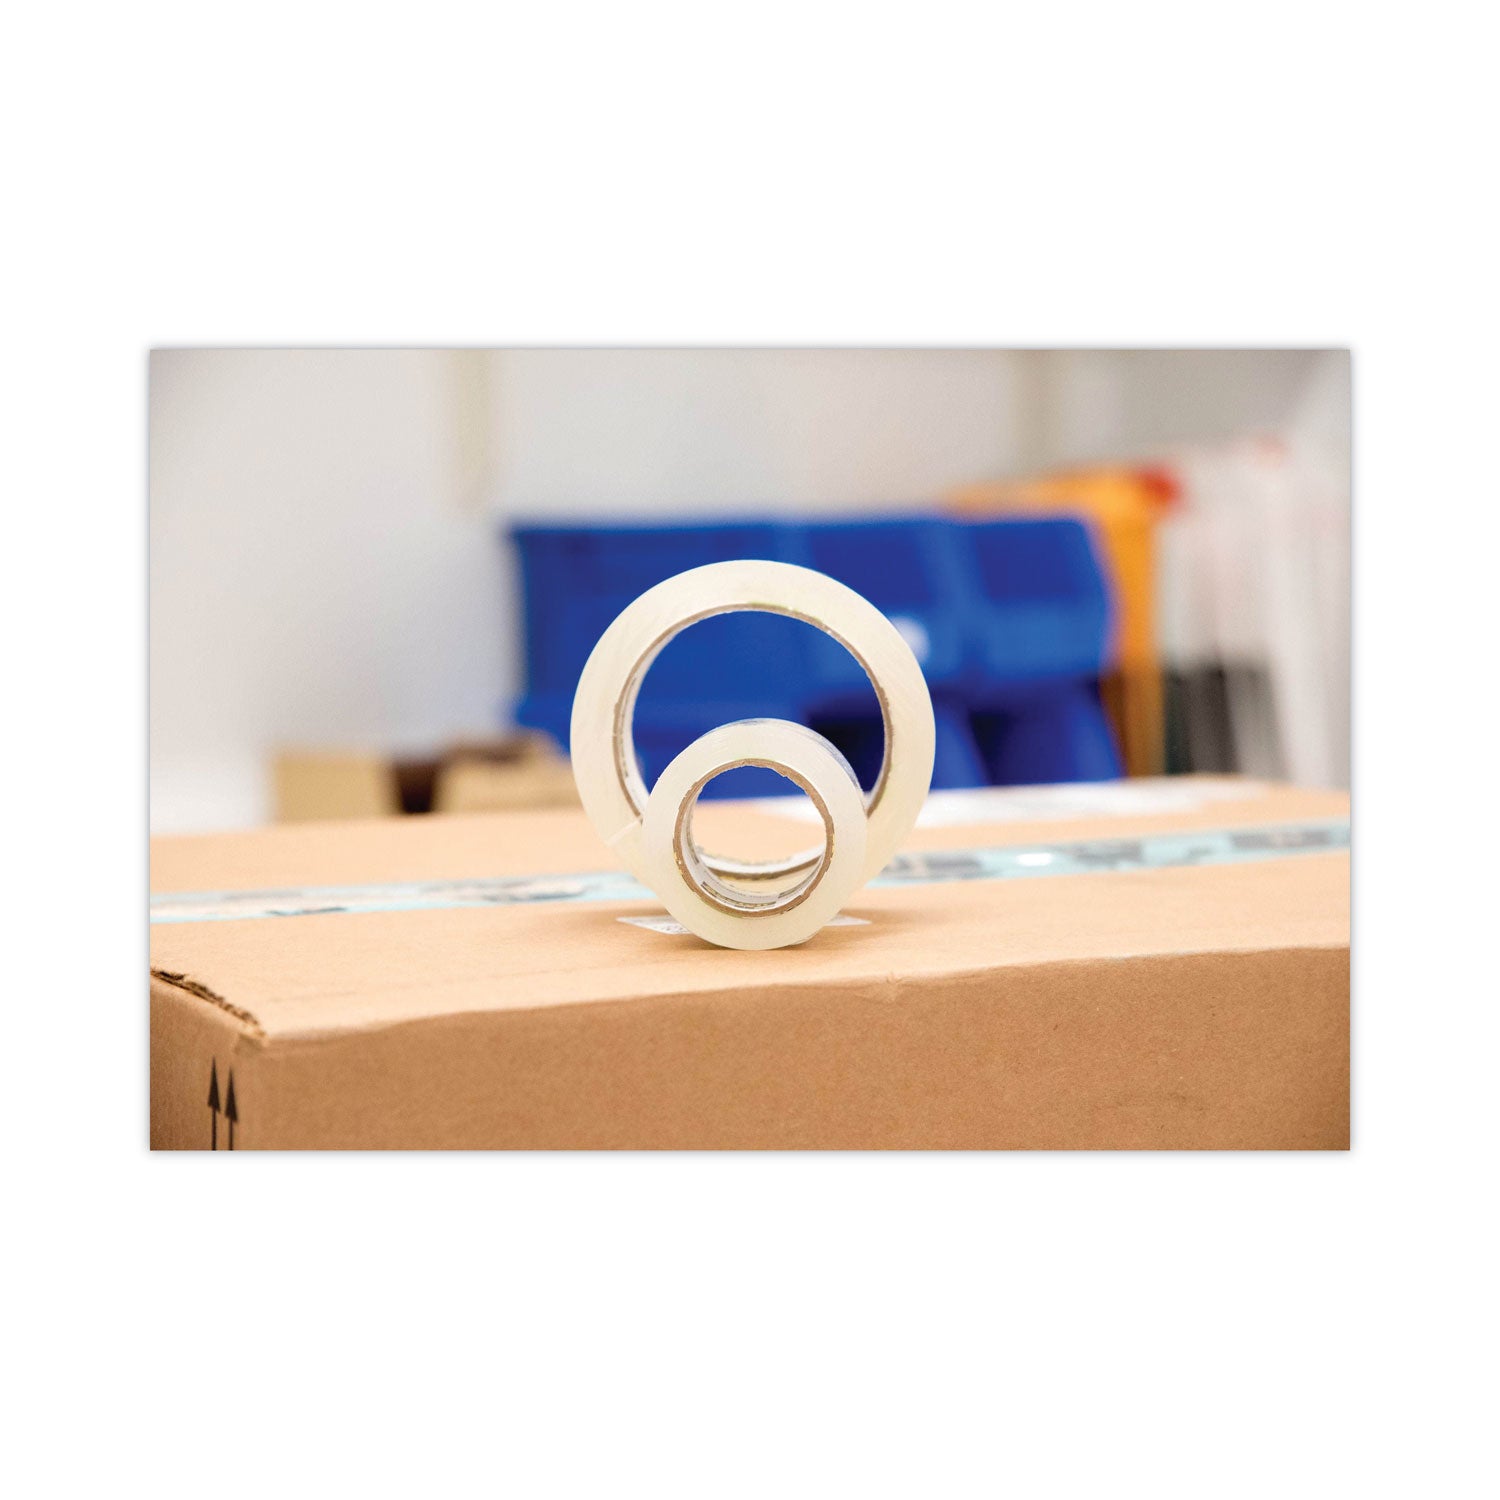 Reinforced Strength Shipping and Strapping Tape in Dispenser, 1.5" Core, 1.88" x 10 yds, Clear - 